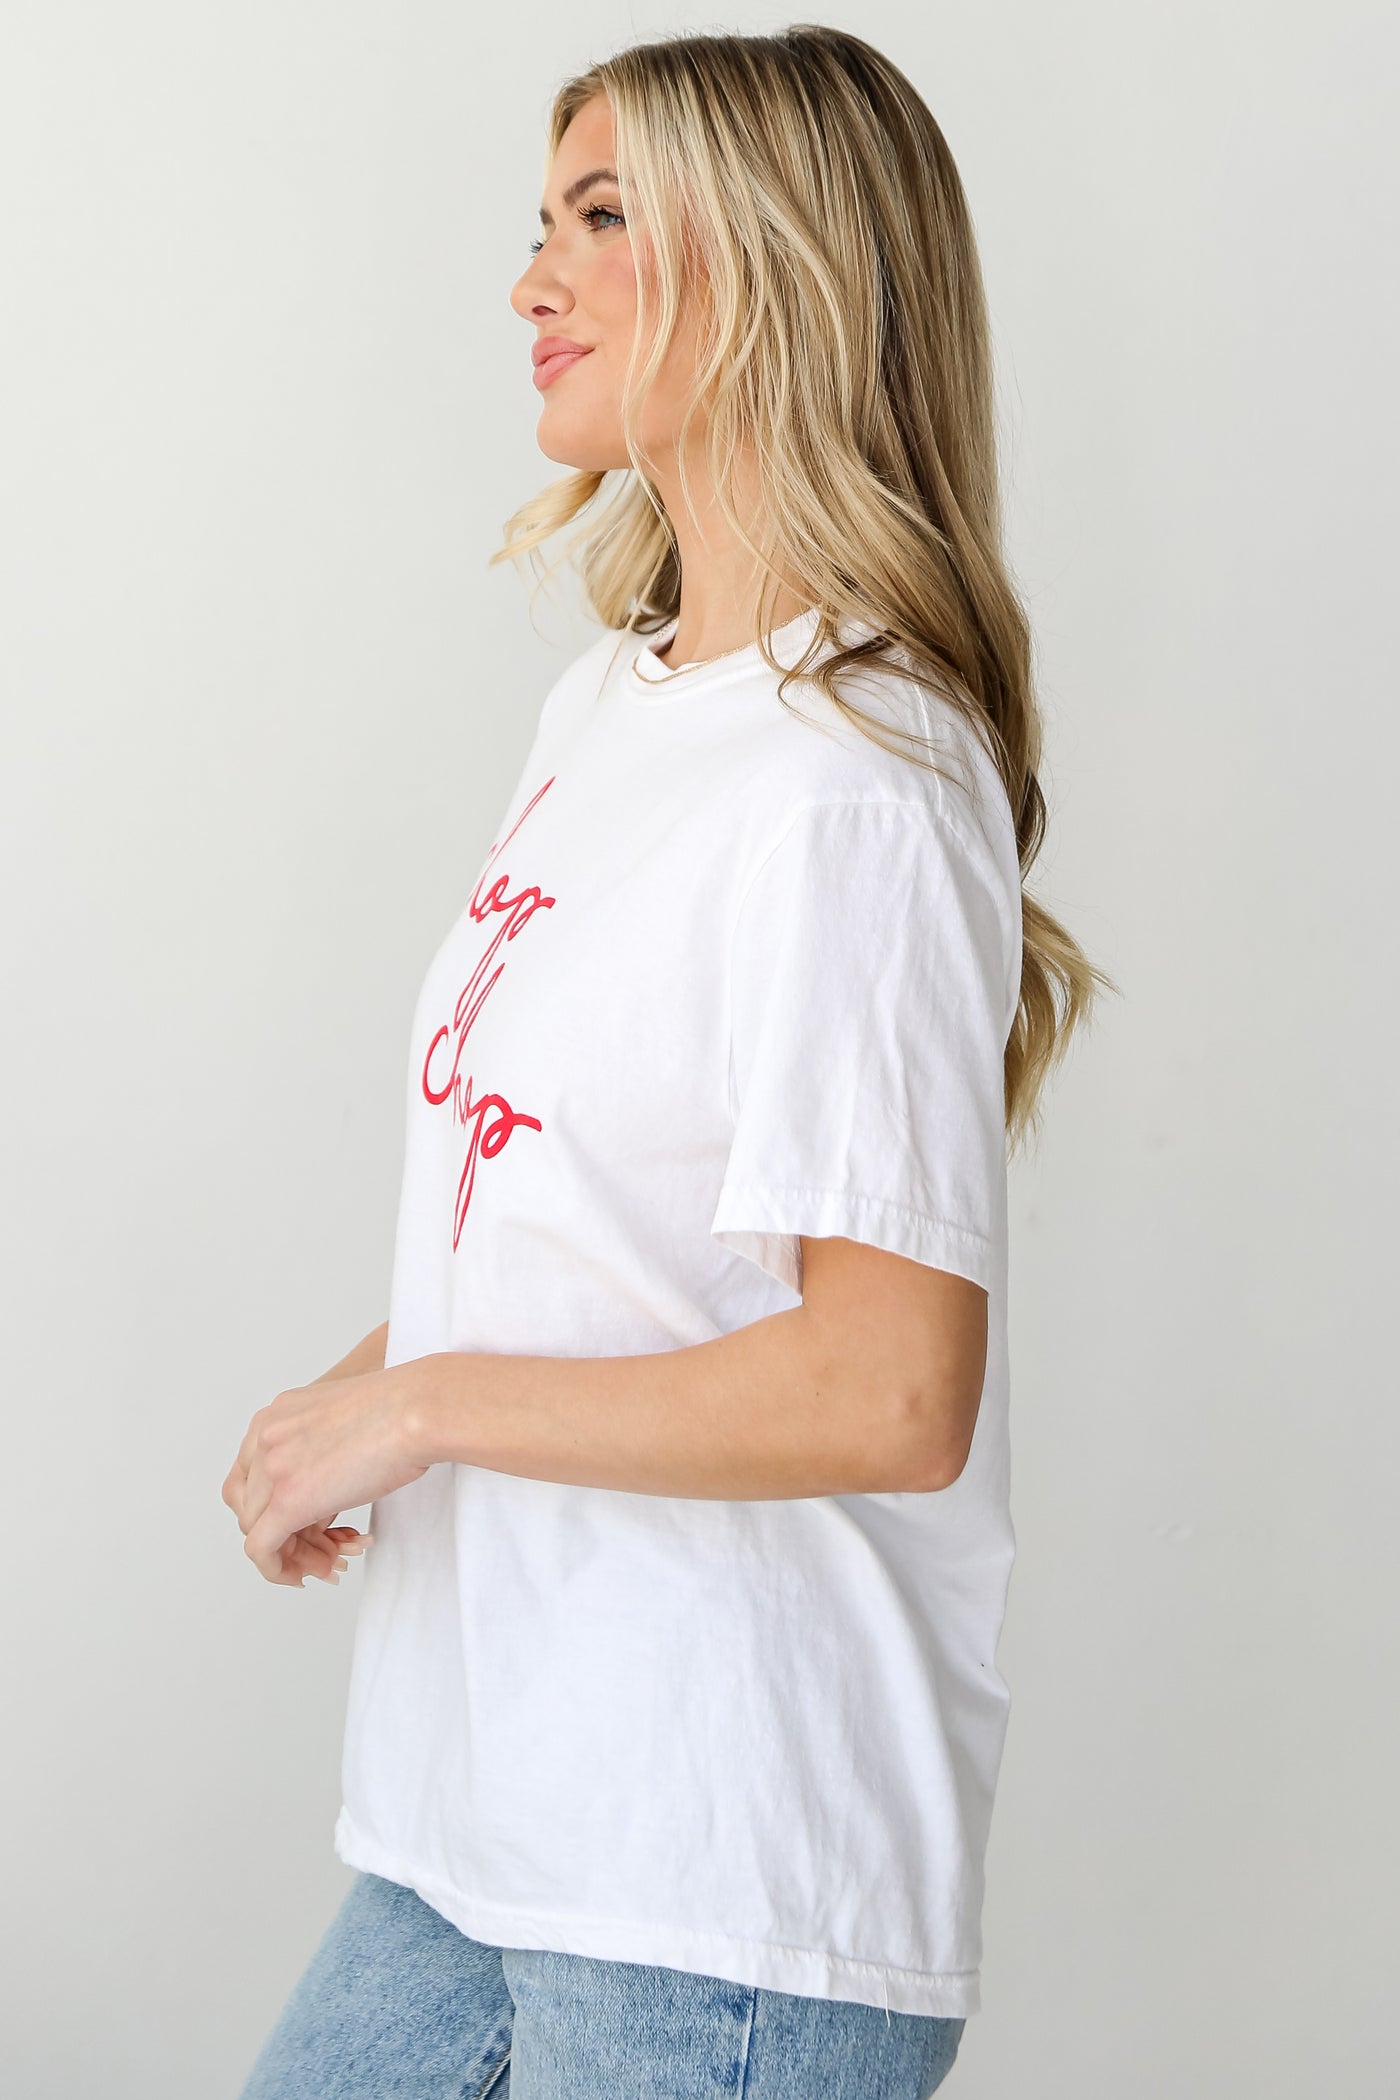 White Chop Chop Graphic Tee side view